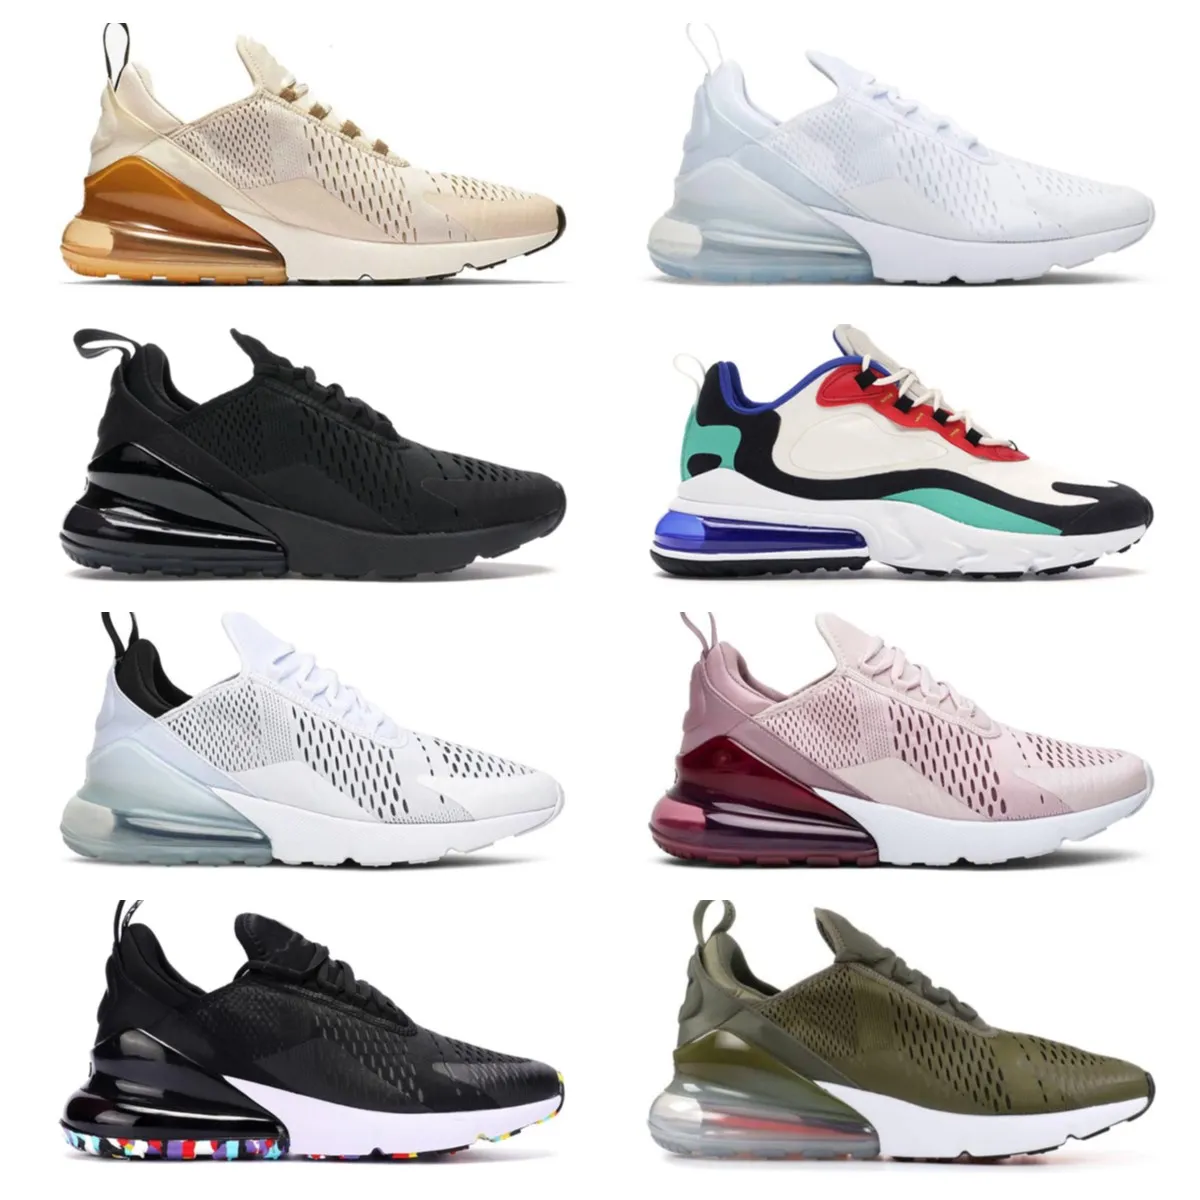 2022 running shoes 270 270s triple white black neon women men chaussures usa be true cactus barely rose rough green Betrue mens trainers Outdoor sneaker